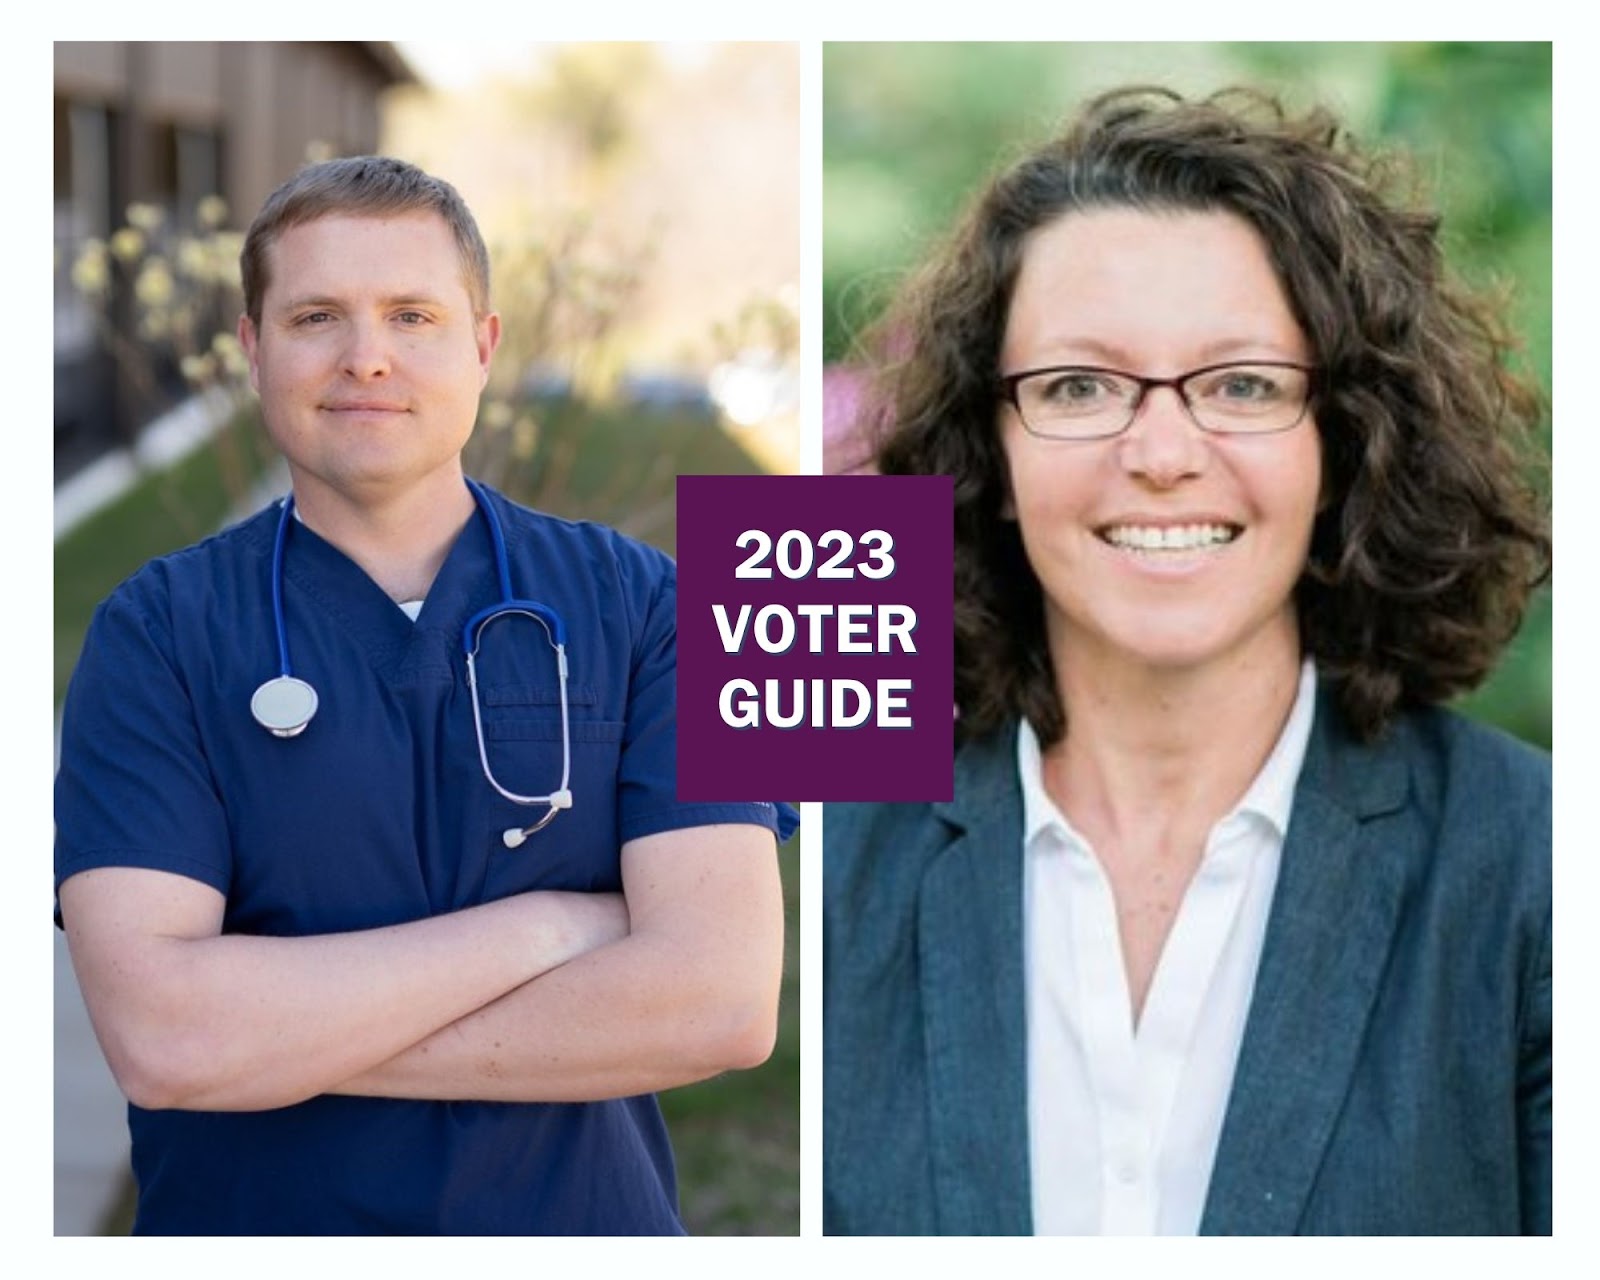 The headshots of two people are positioned side by side in a collage. In between the two photos in a box are the words "2023 Voter Guide."